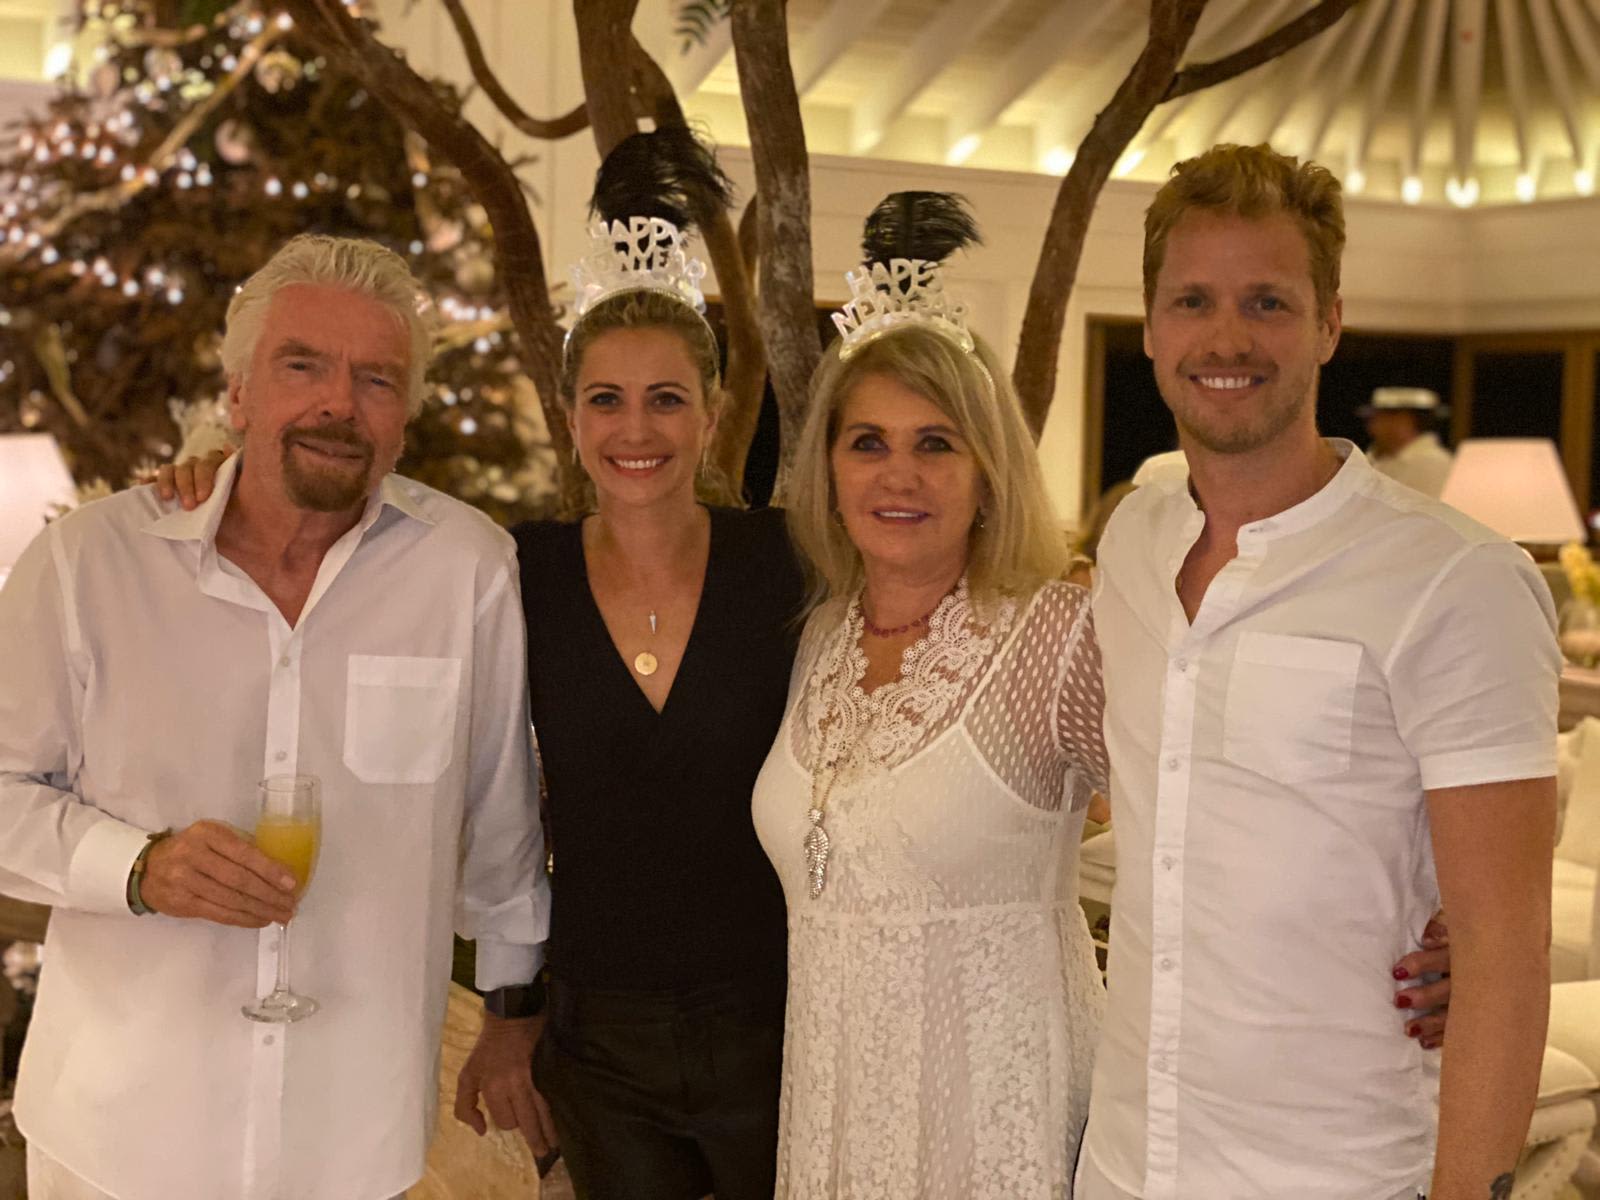 Richard Branson with the family on New Year's Eve